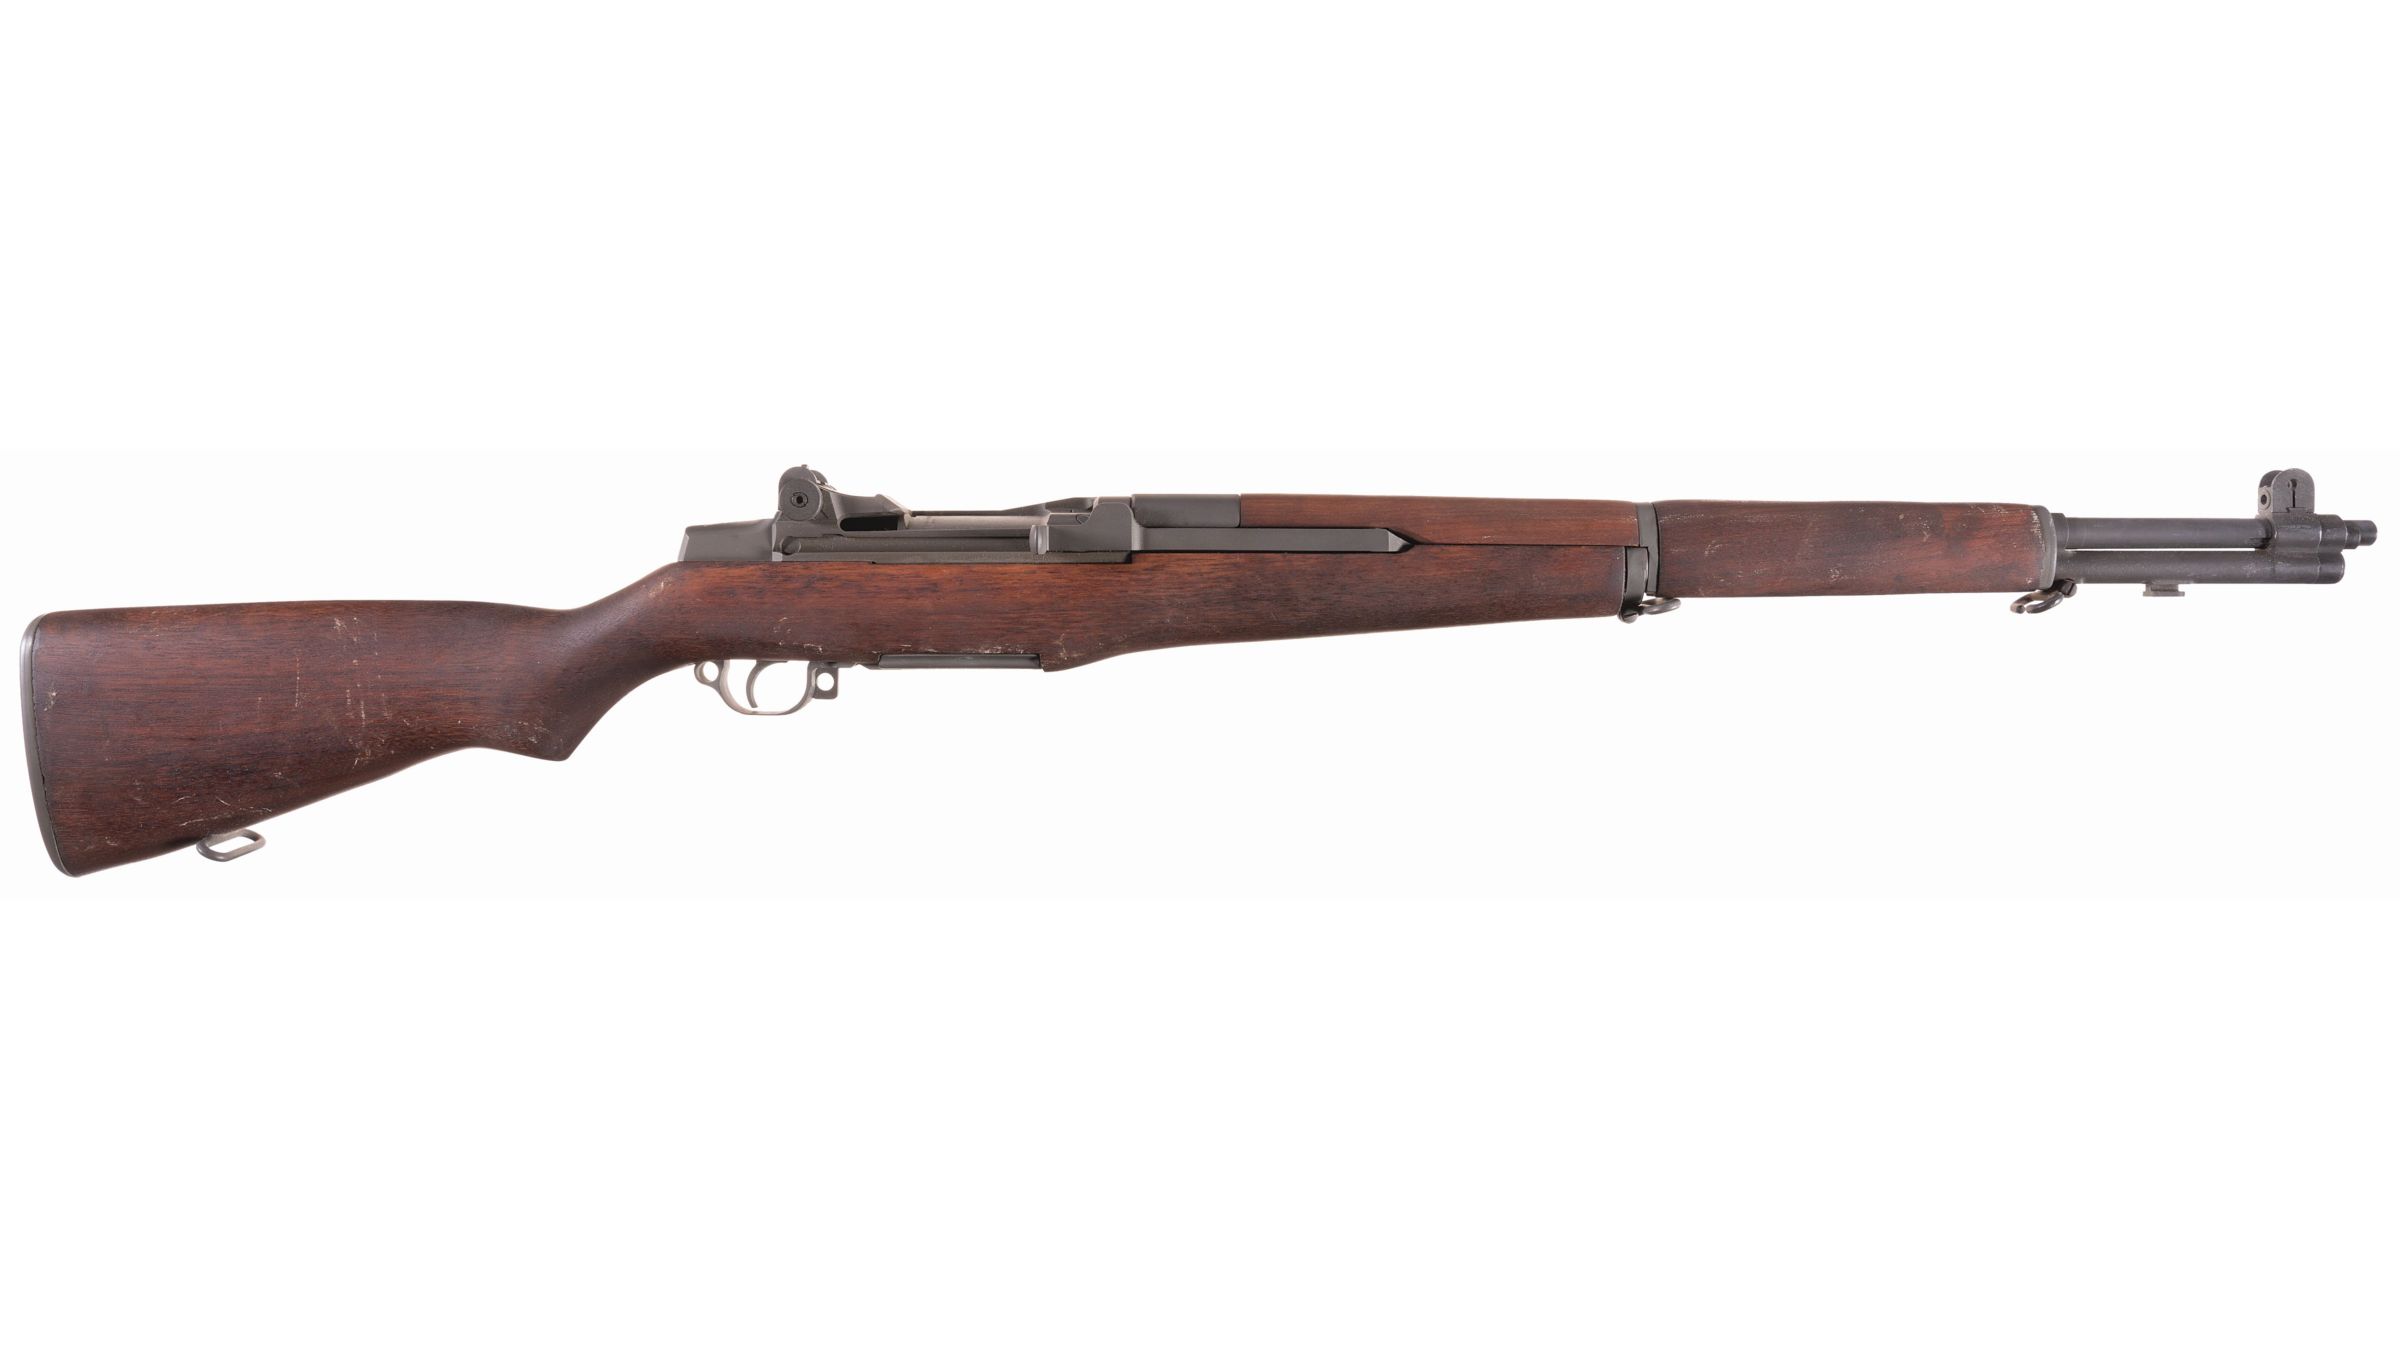 U.S. Springfield M1D Rifle with Scope and Accessories | Rock Island Auction